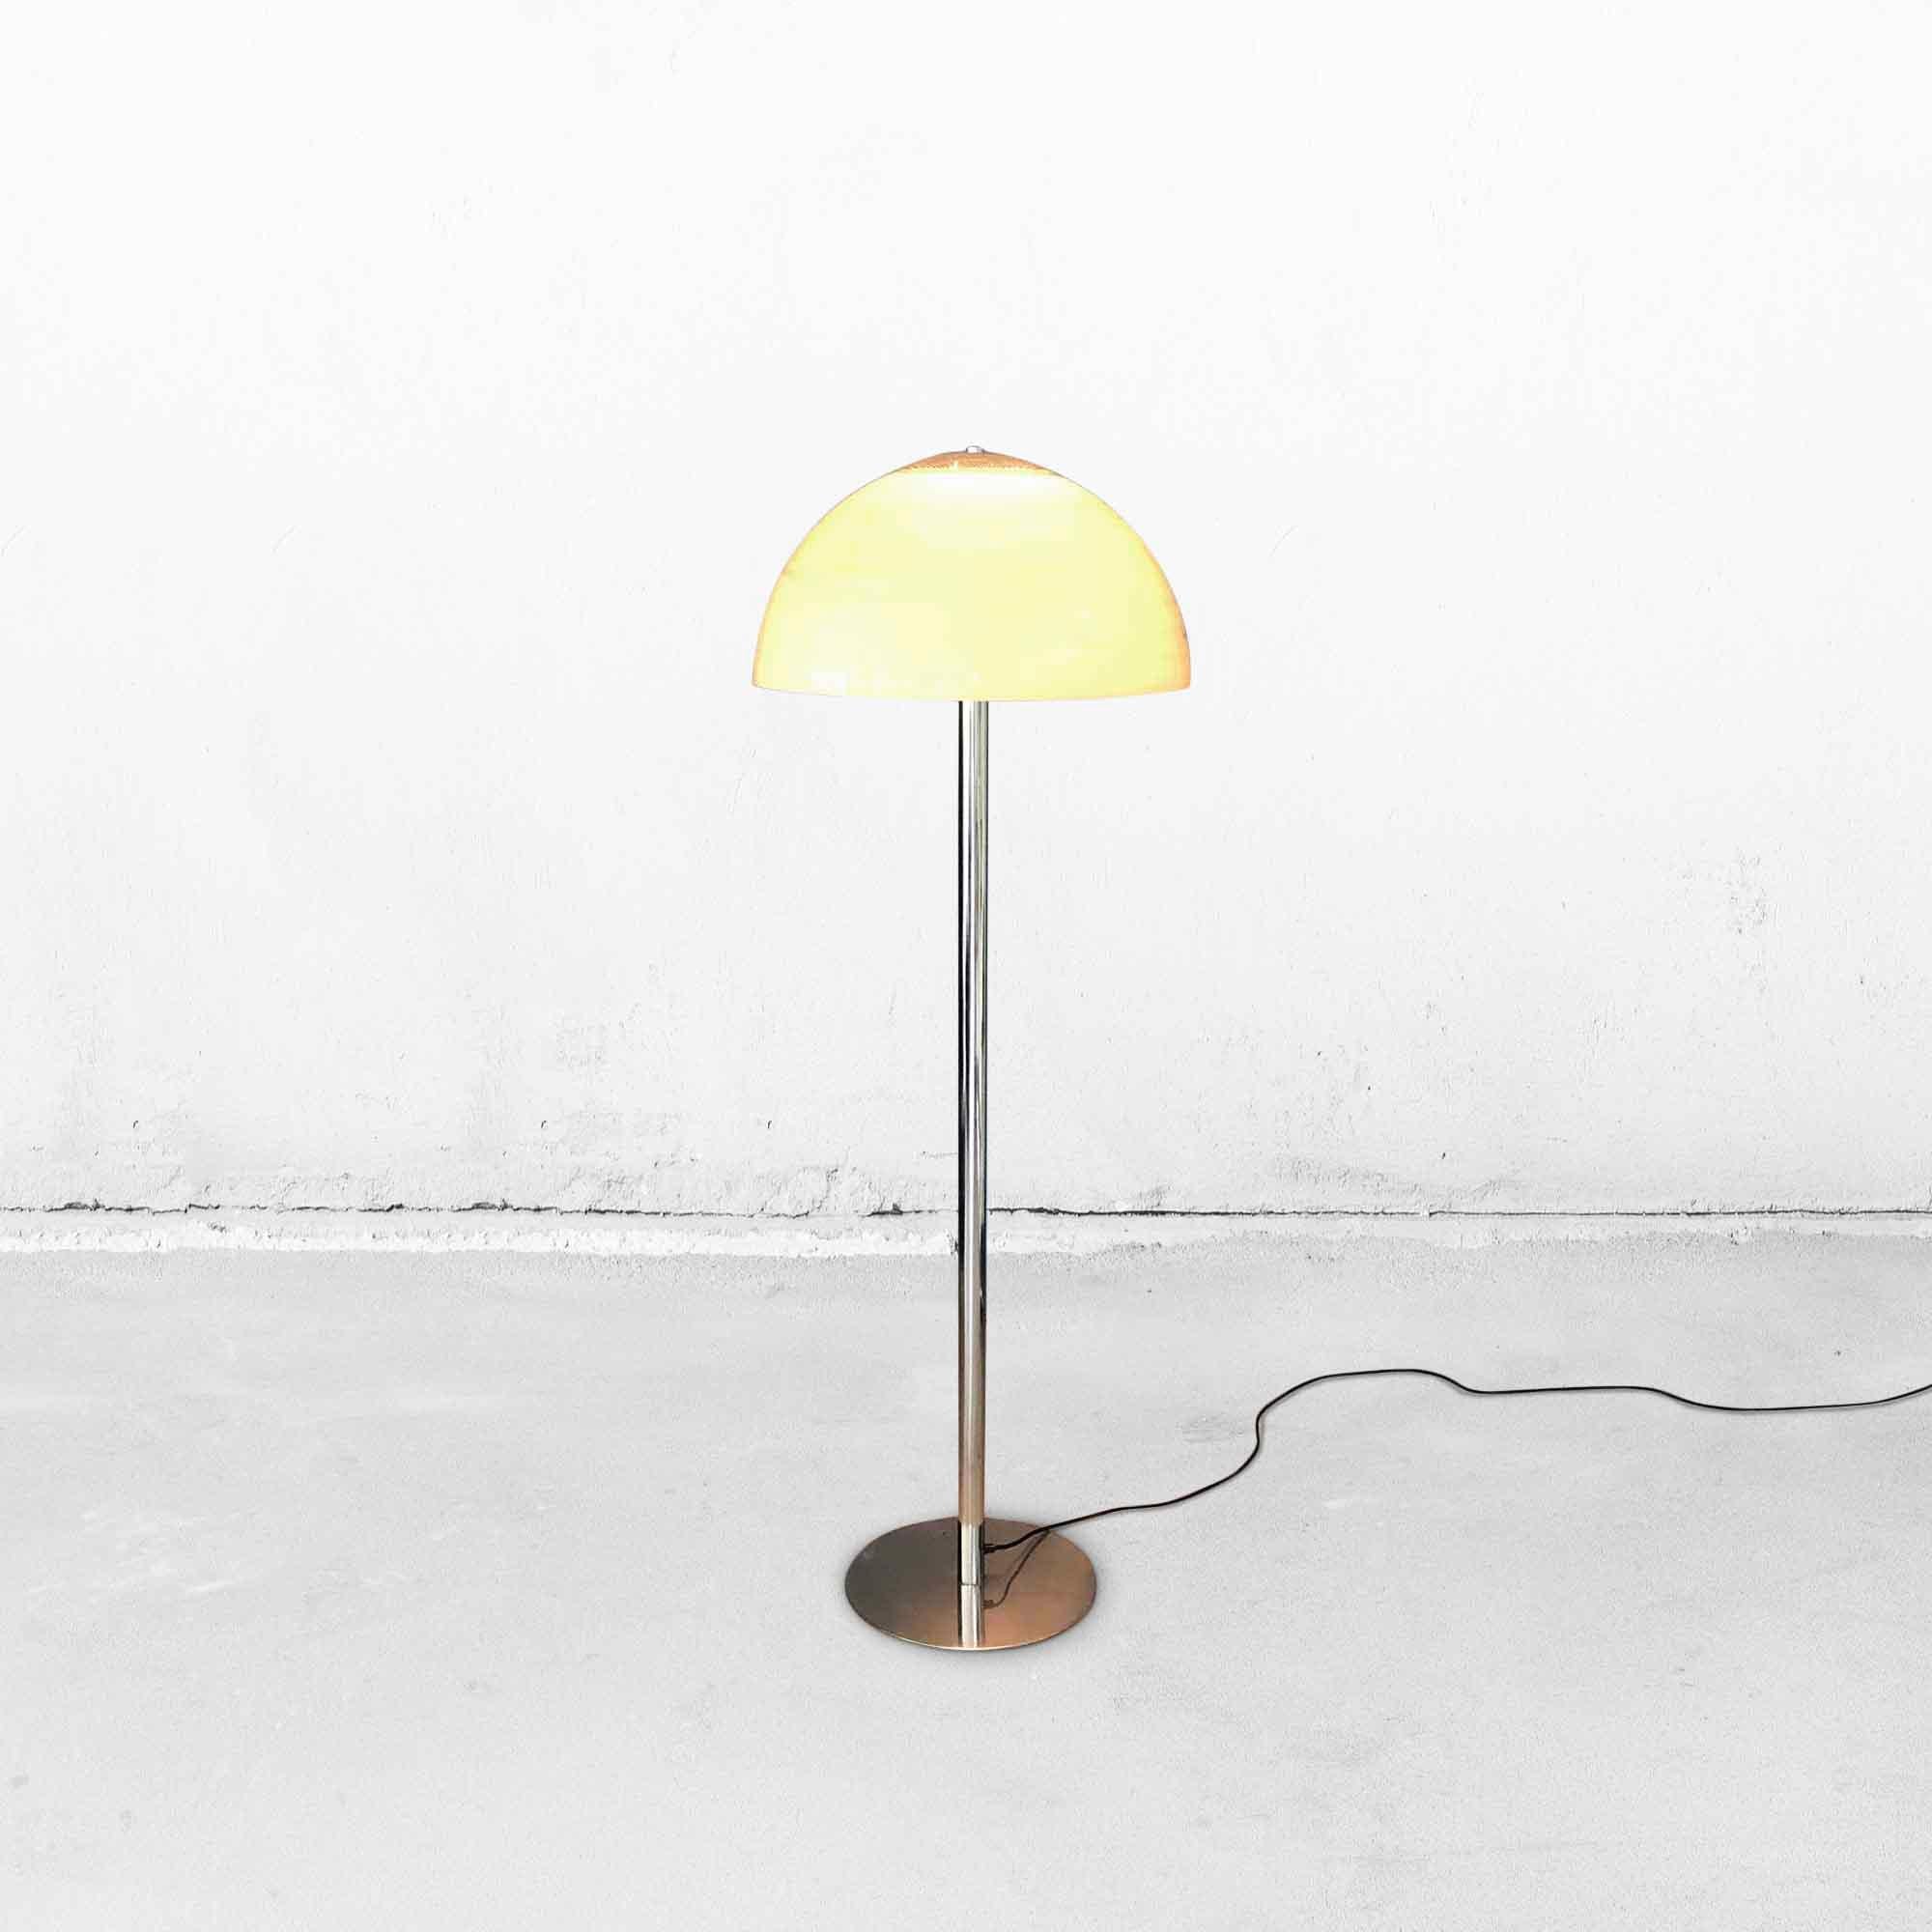 A very nice floor lamp with a chrome base and a large plastic shade. The lampshade is in beige shades and has a marble look. This large mushroom lamp has 1 light point and gives a beautiful warm light, which illuminates the entire room in an